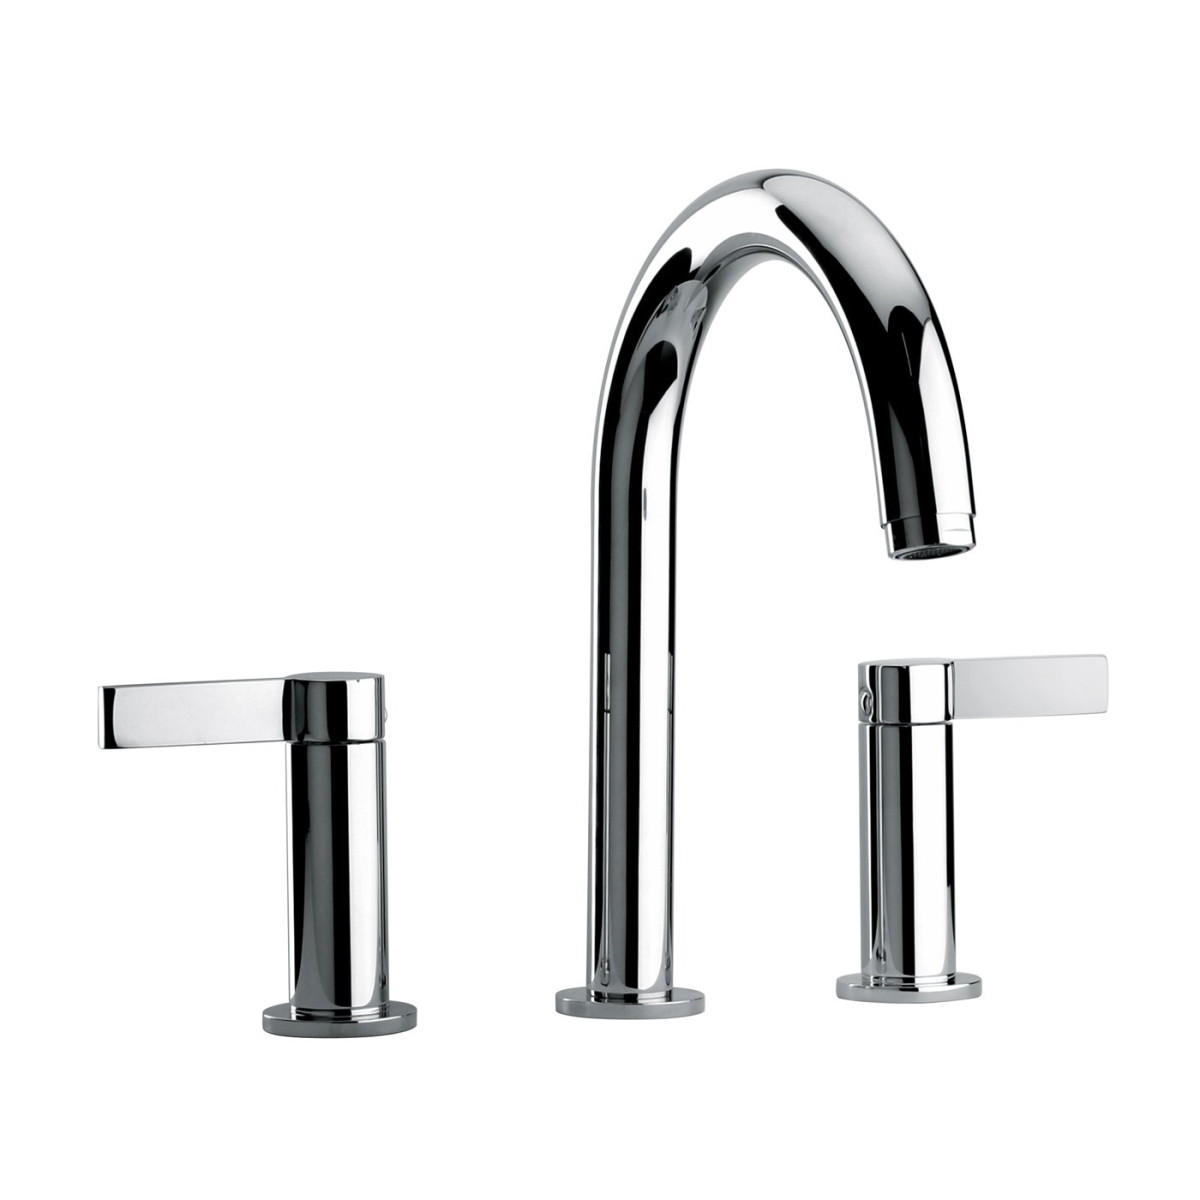 14102-30 Faucets Two Lever Handle Roman Tub Faucet With Classic Spout, Matte Gray Finish Model